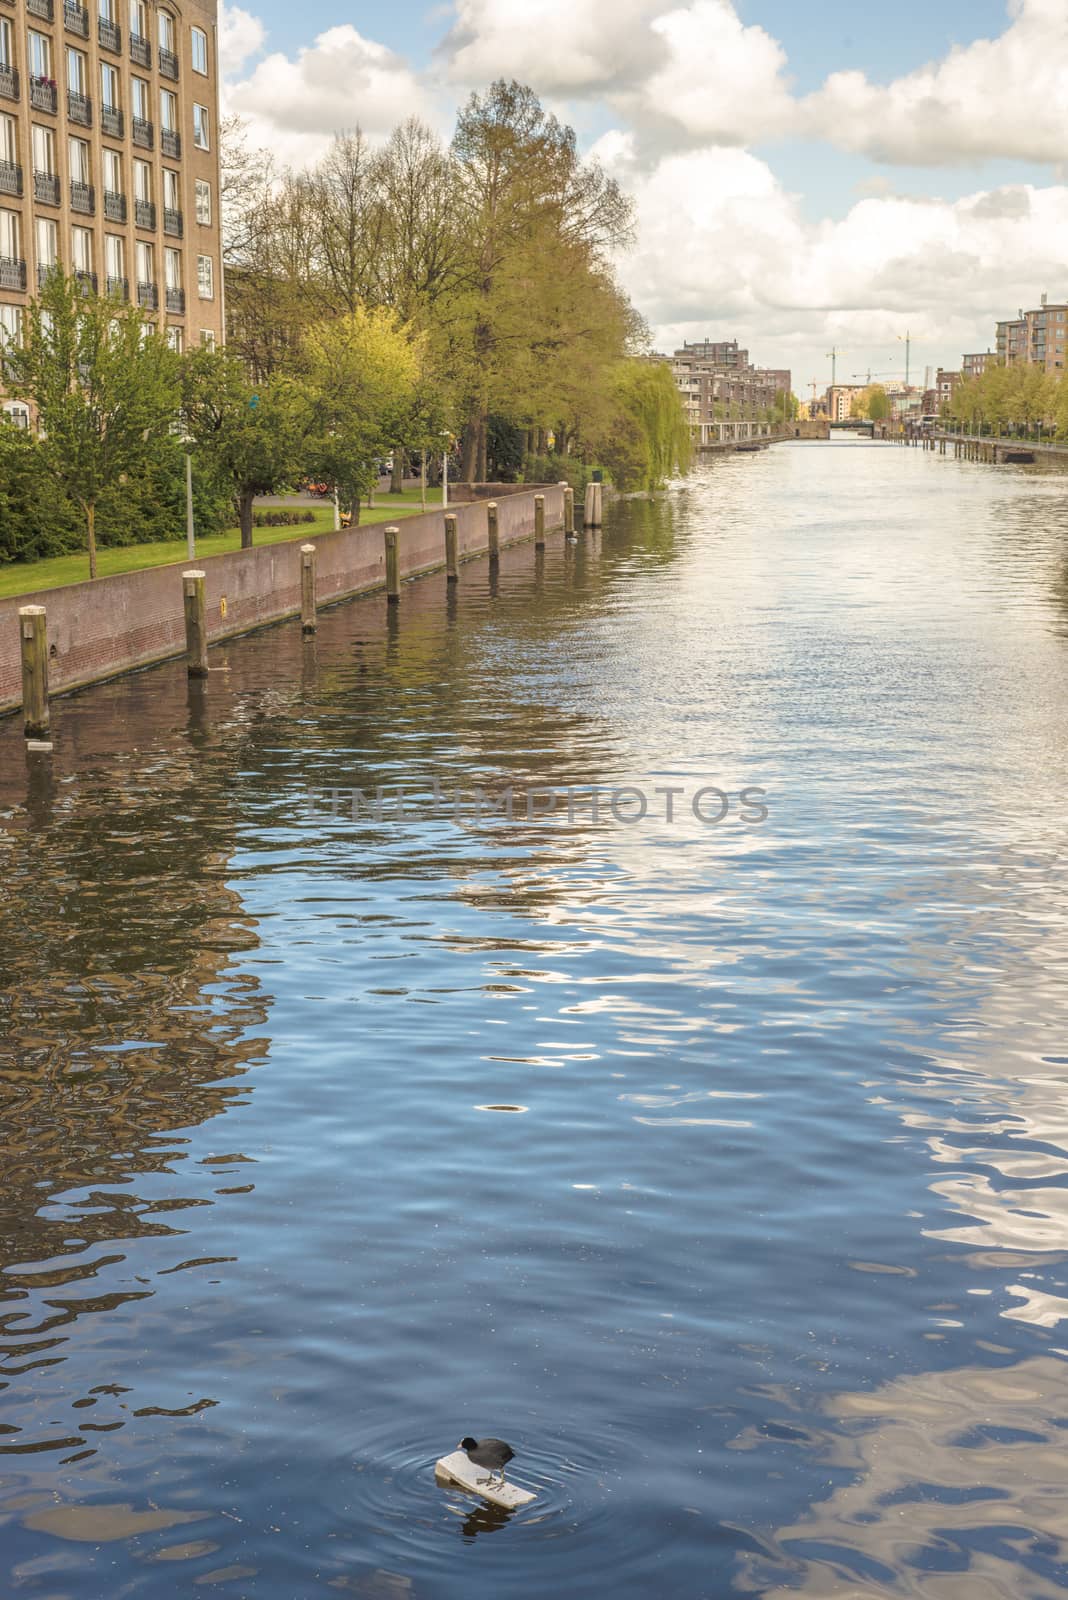 A Eurasian Coot standing on styrofoam in an Amsterdam canal by Pendleton